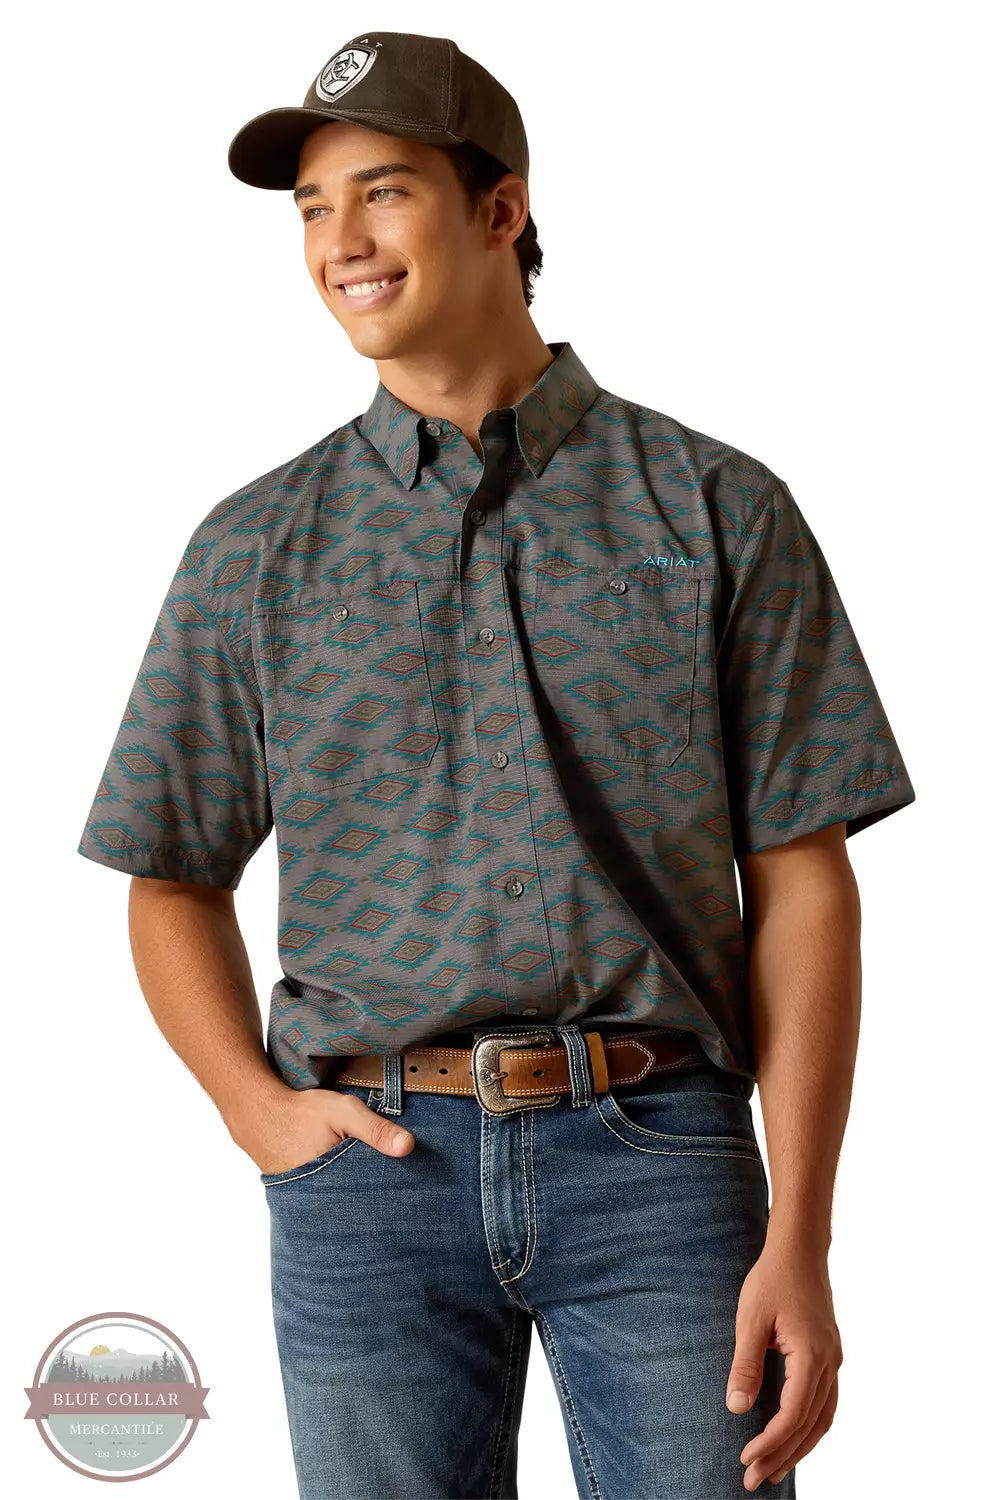 Ariat 10048568 360 Airflow Classic Fit Short Sleeve Shirt in a Gray & Teal Print Front View